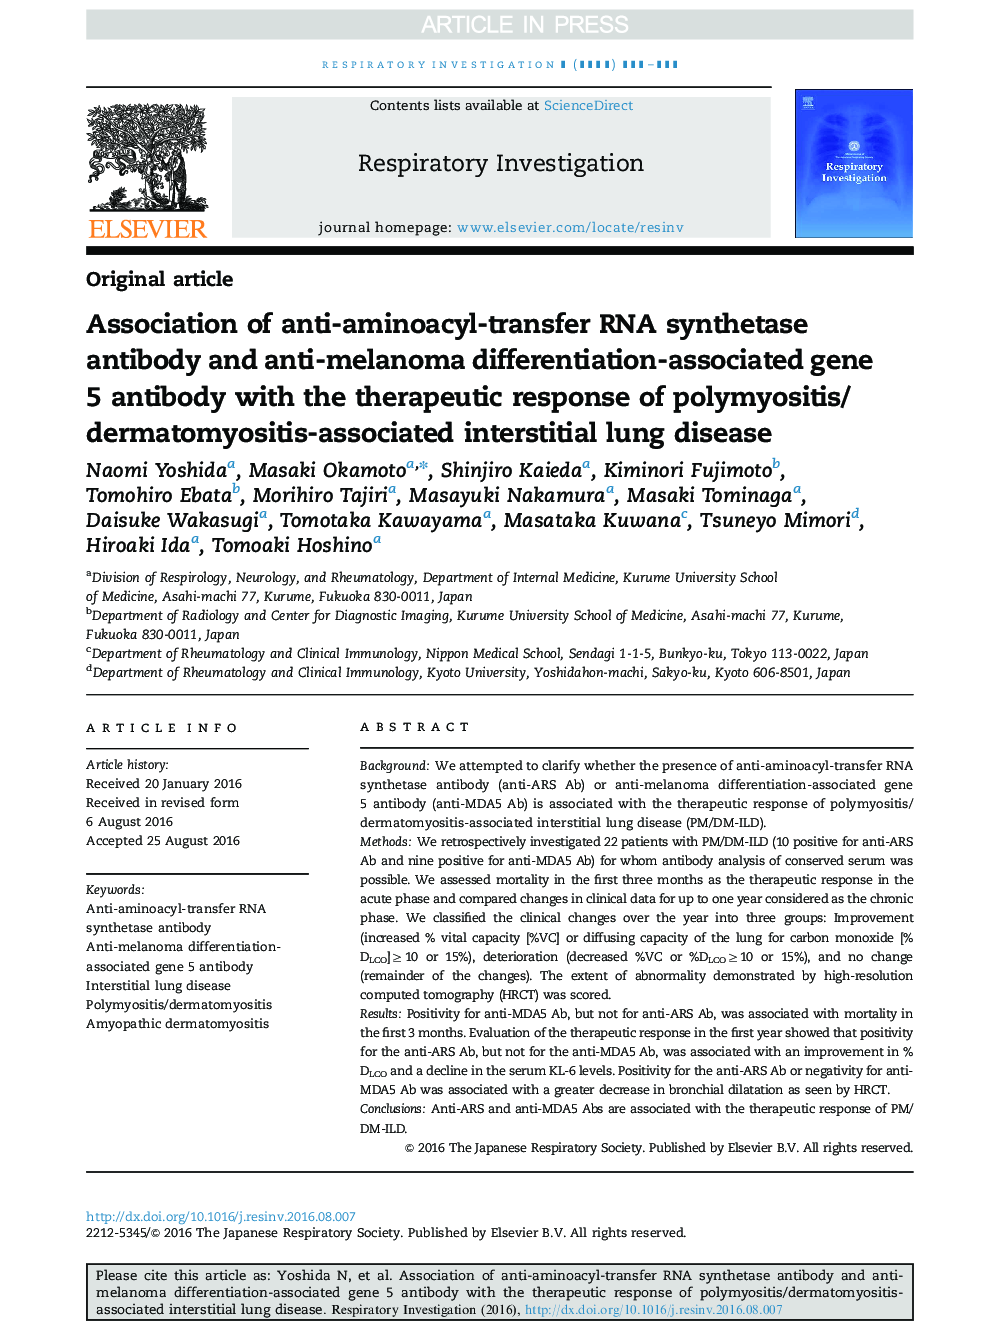 Association of anti-aminoacyl-transfer RNA synthetase antibody and anti-melanoma differentiation-associated gene 5 antibody with the therapeutic response of polymyositis/dermatomyositis-associated interstitial lung disease